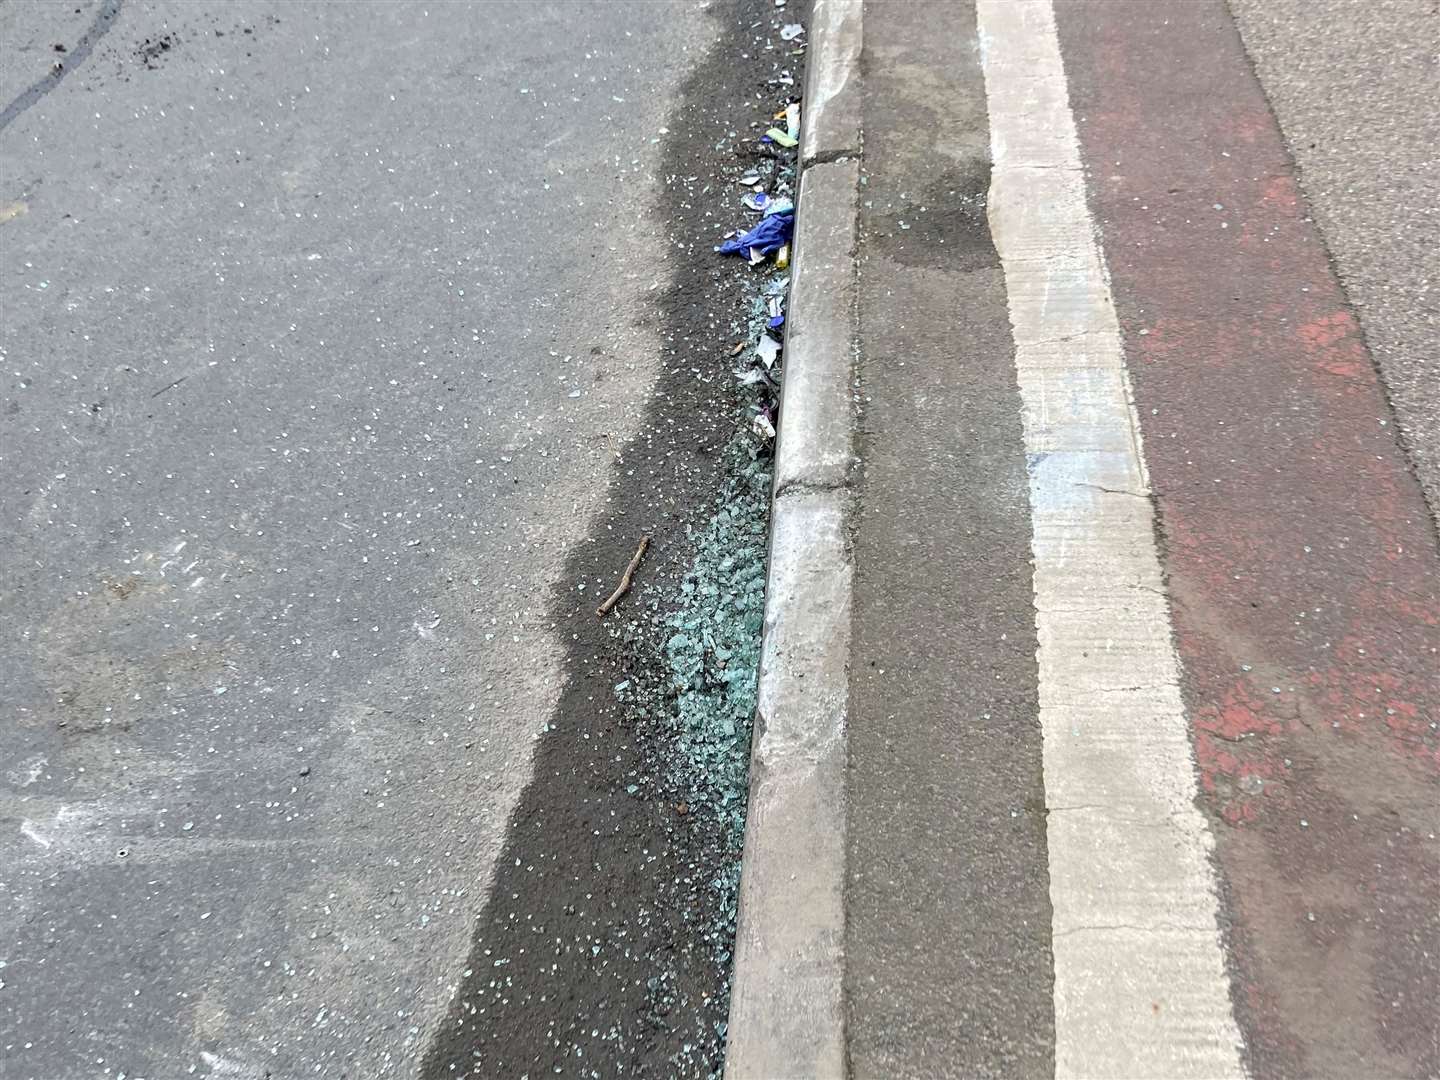 Smashed glass next to the kerb, possibly from the accident